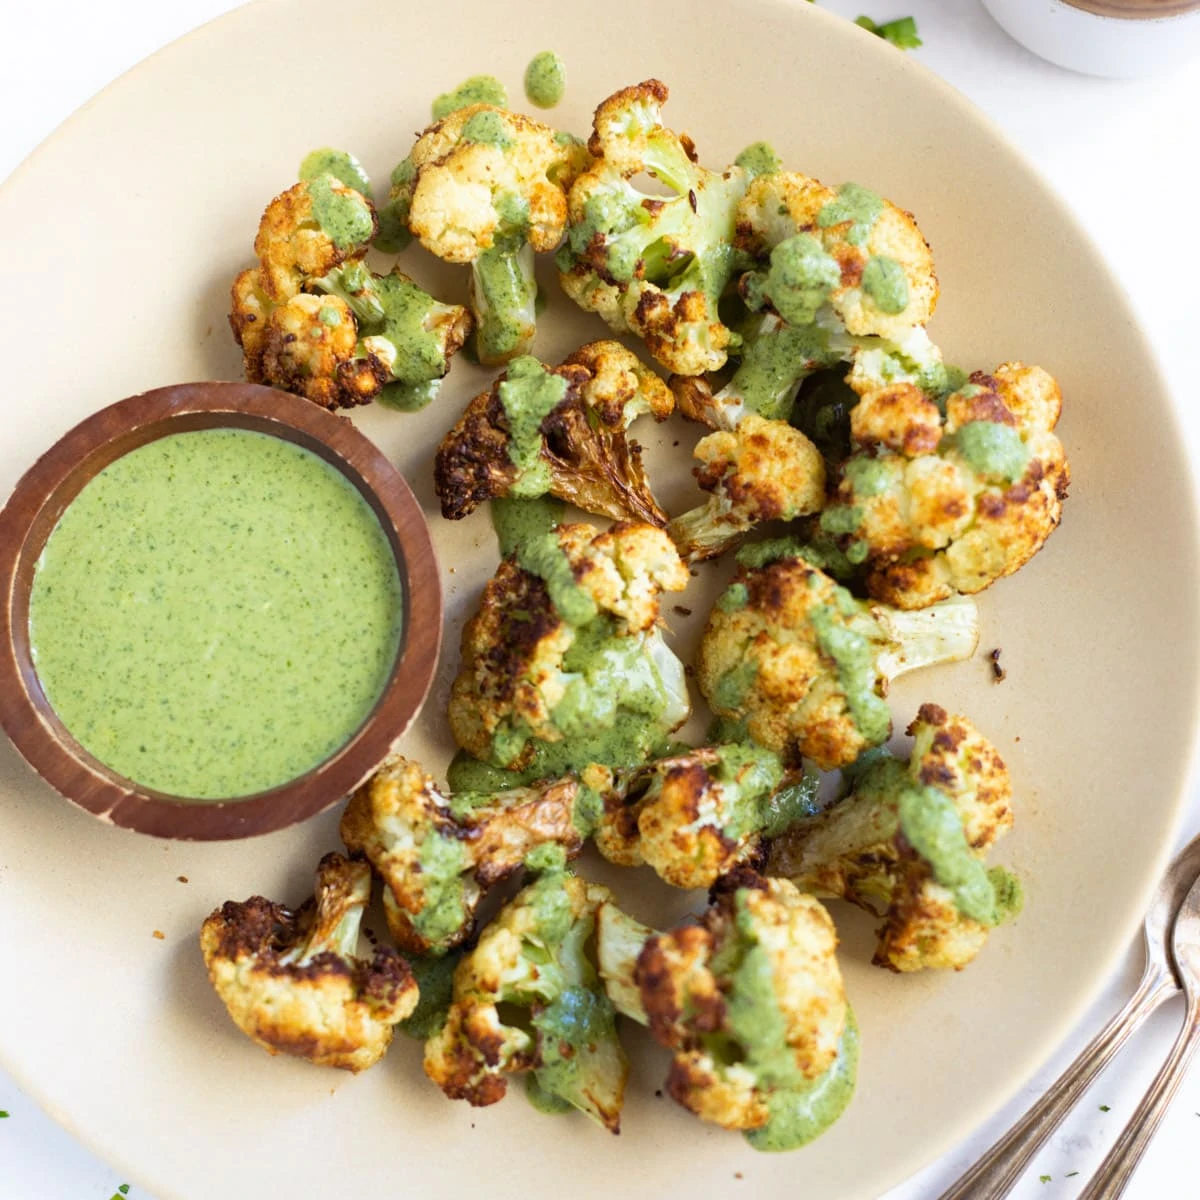 Roasted cauliflower topped with green cilantro sauce